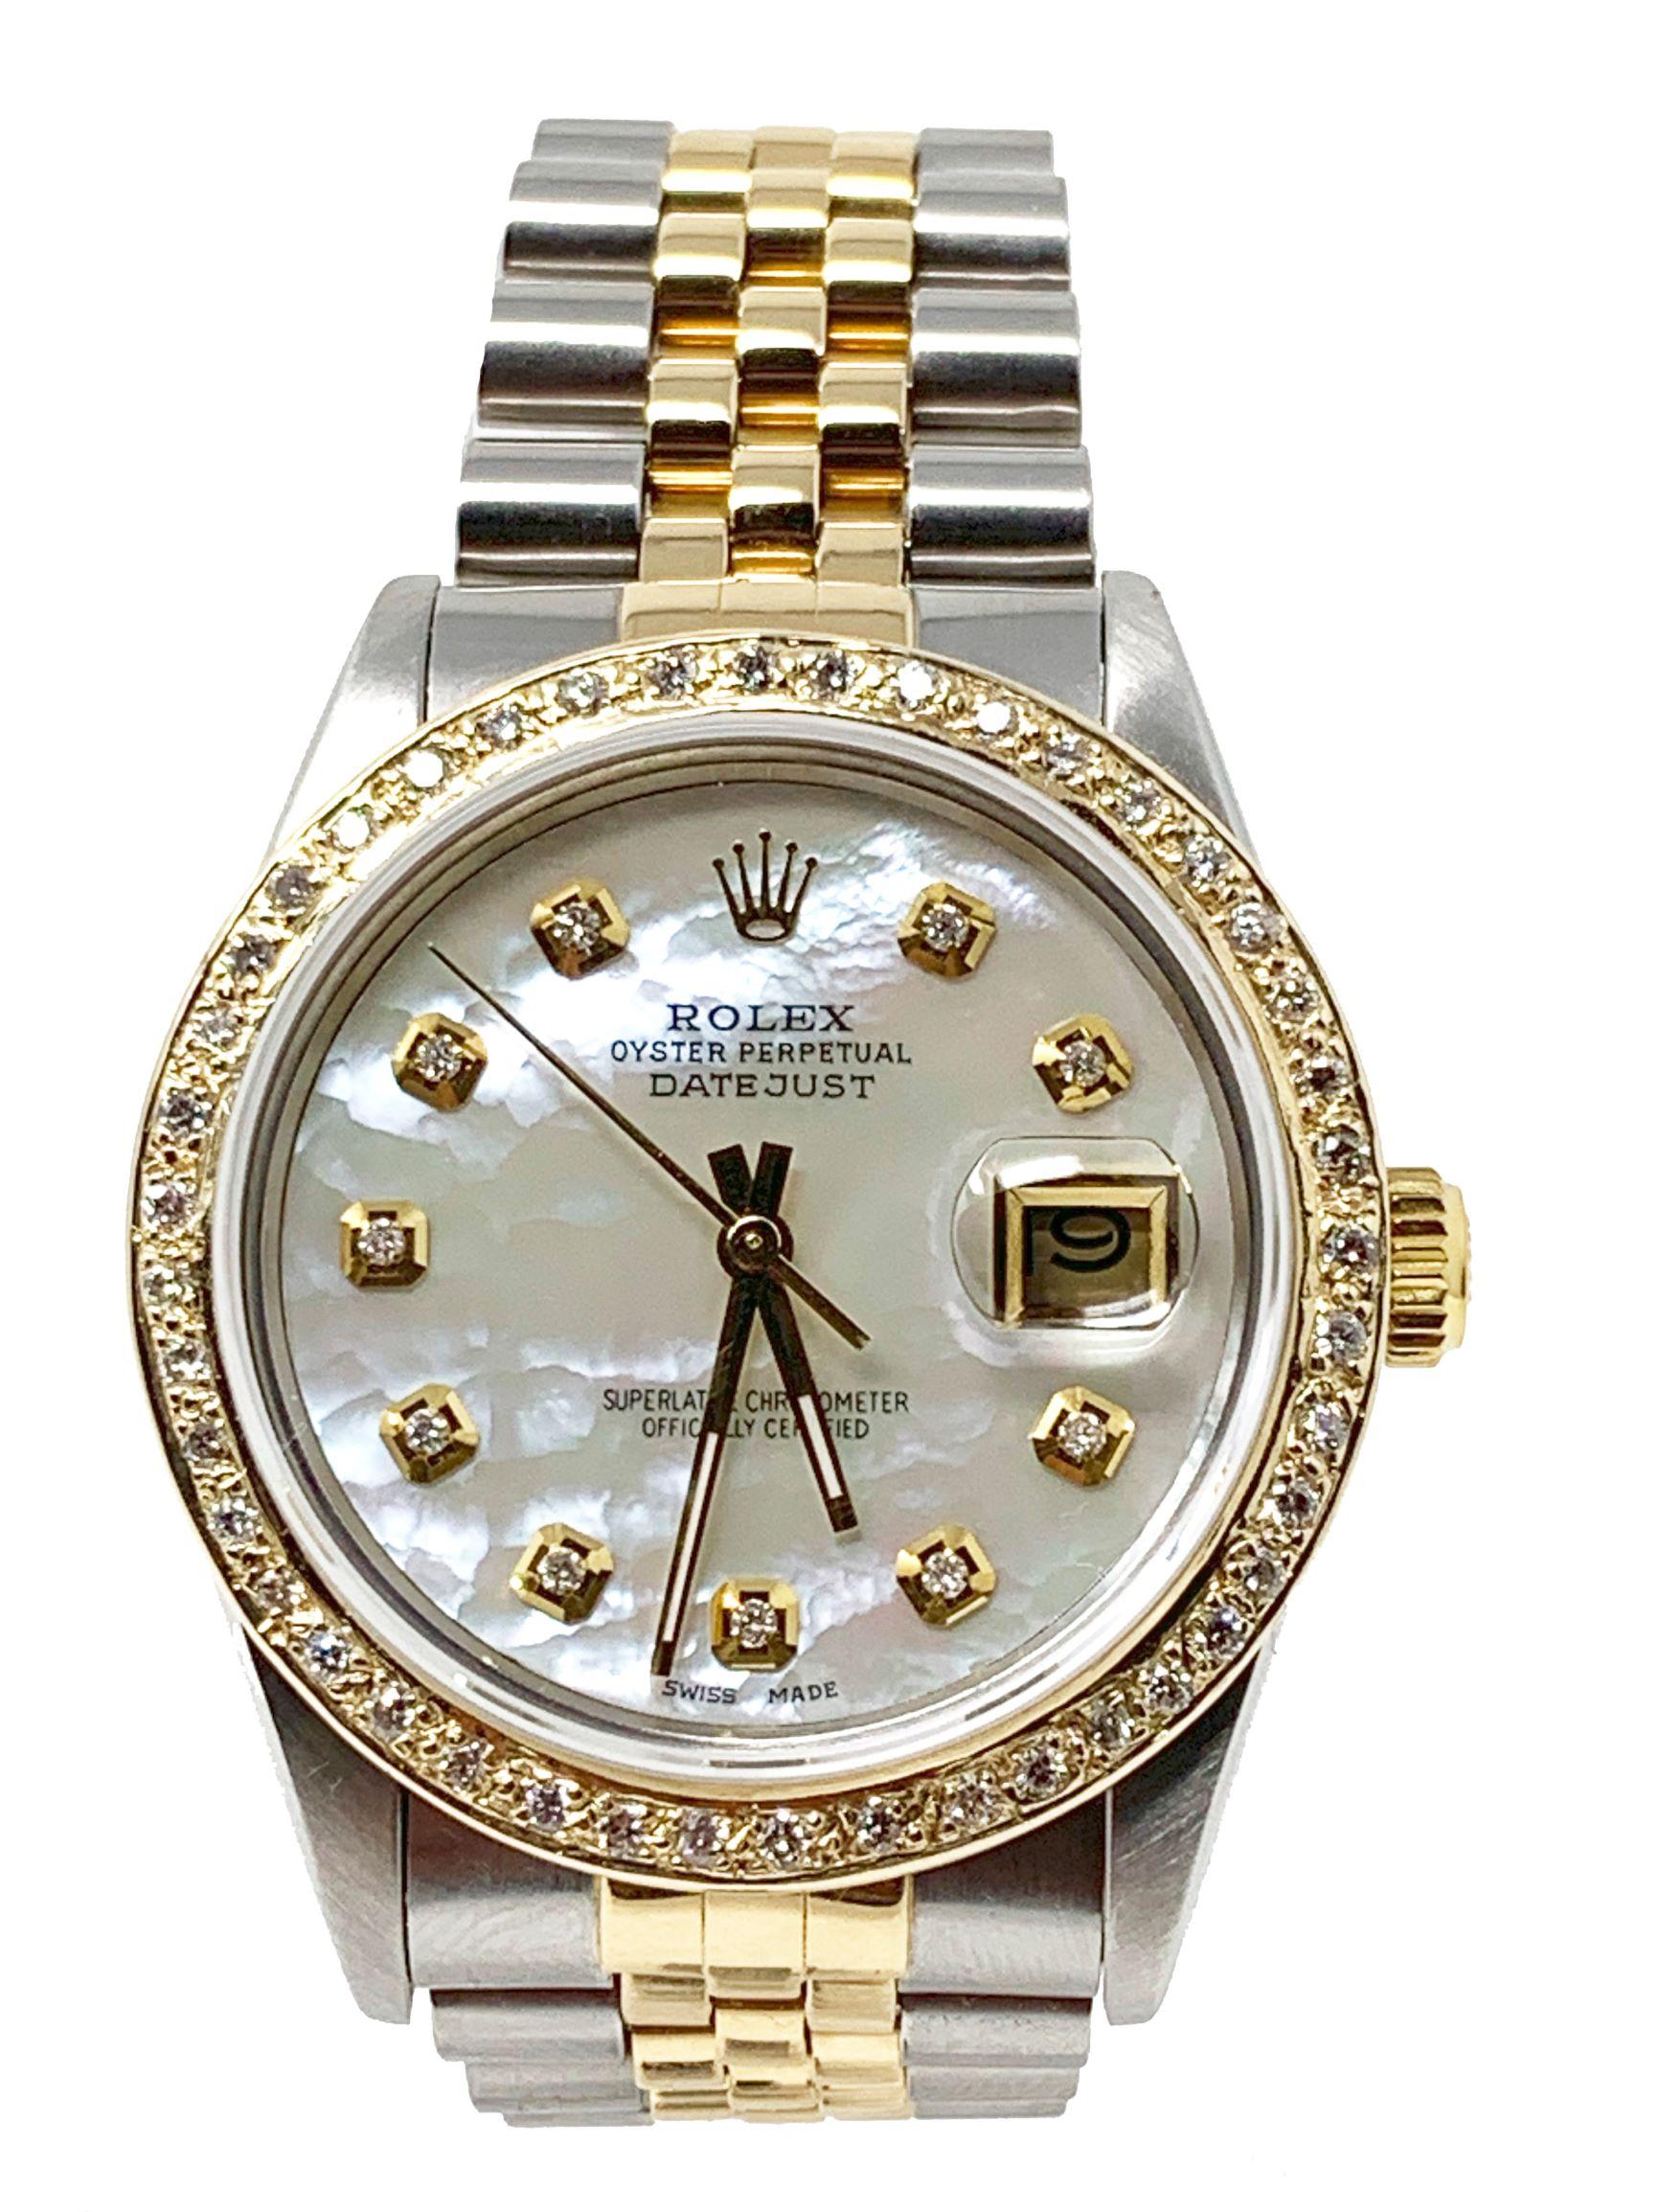 Model - 16013 Datejust 
Case Size - 36MM
Gender - Unisex 
Crystal - Sapphire
Calendar - Yes
Metals - Solid Gold/Stainless Steel 
Dial - Refinished Mother of pearl Diamond
Bezel - Solid Gold, 1CT Diamond
Band - Two-TONE Jubilee
Movement - Rolex